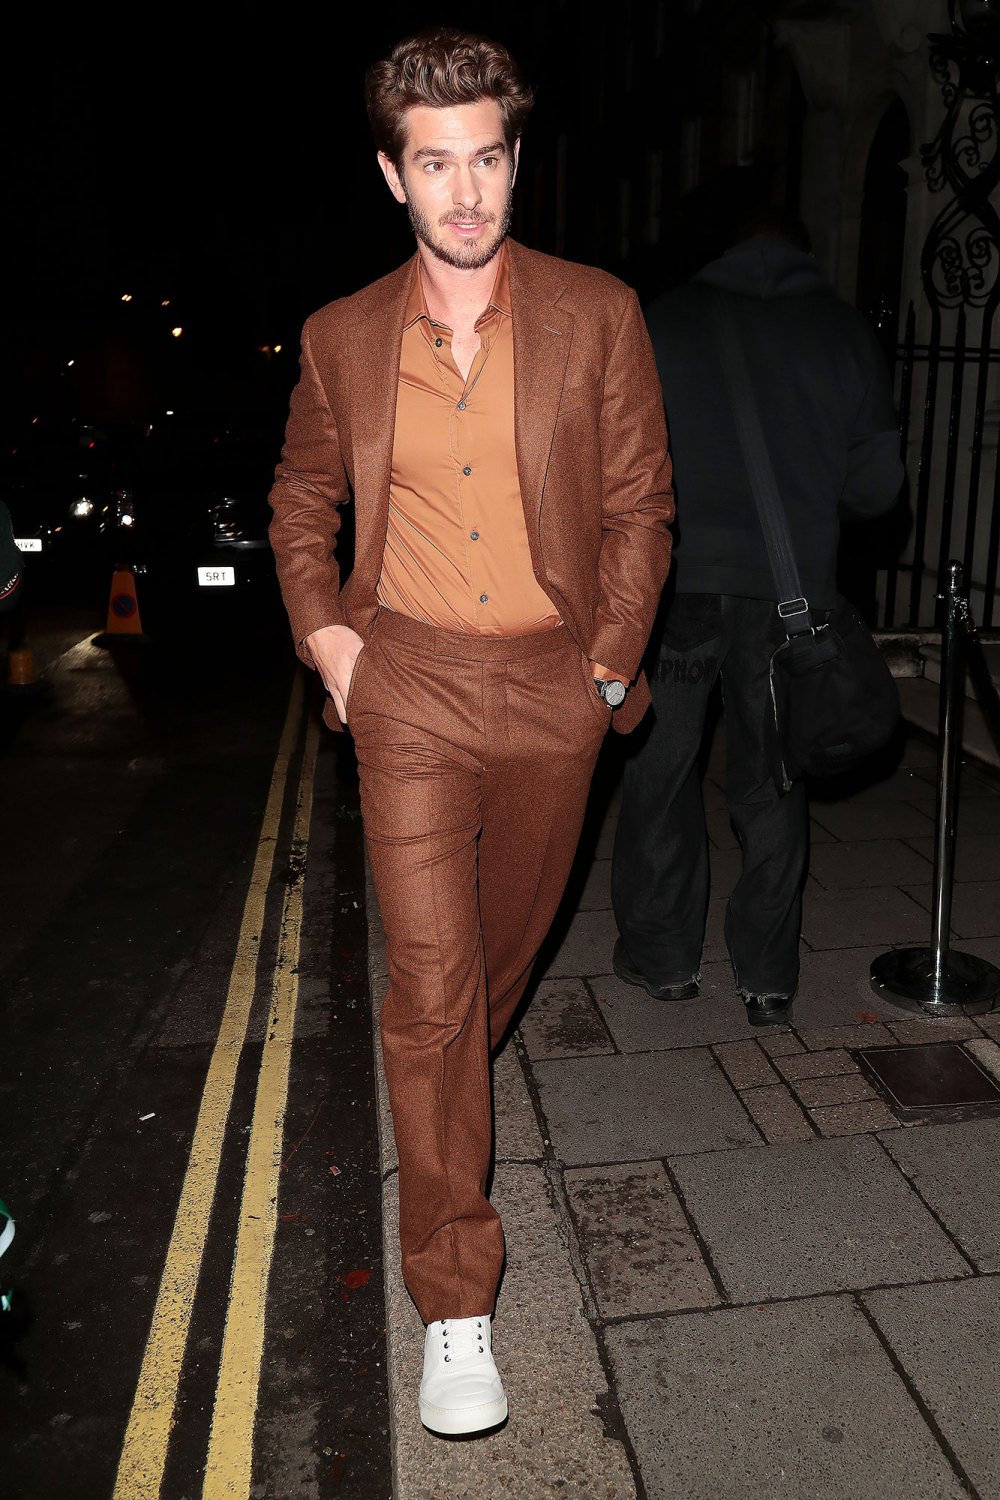 Andrew Garfield Masters Tonal Dressing in Crisp Autumn Outfit 2